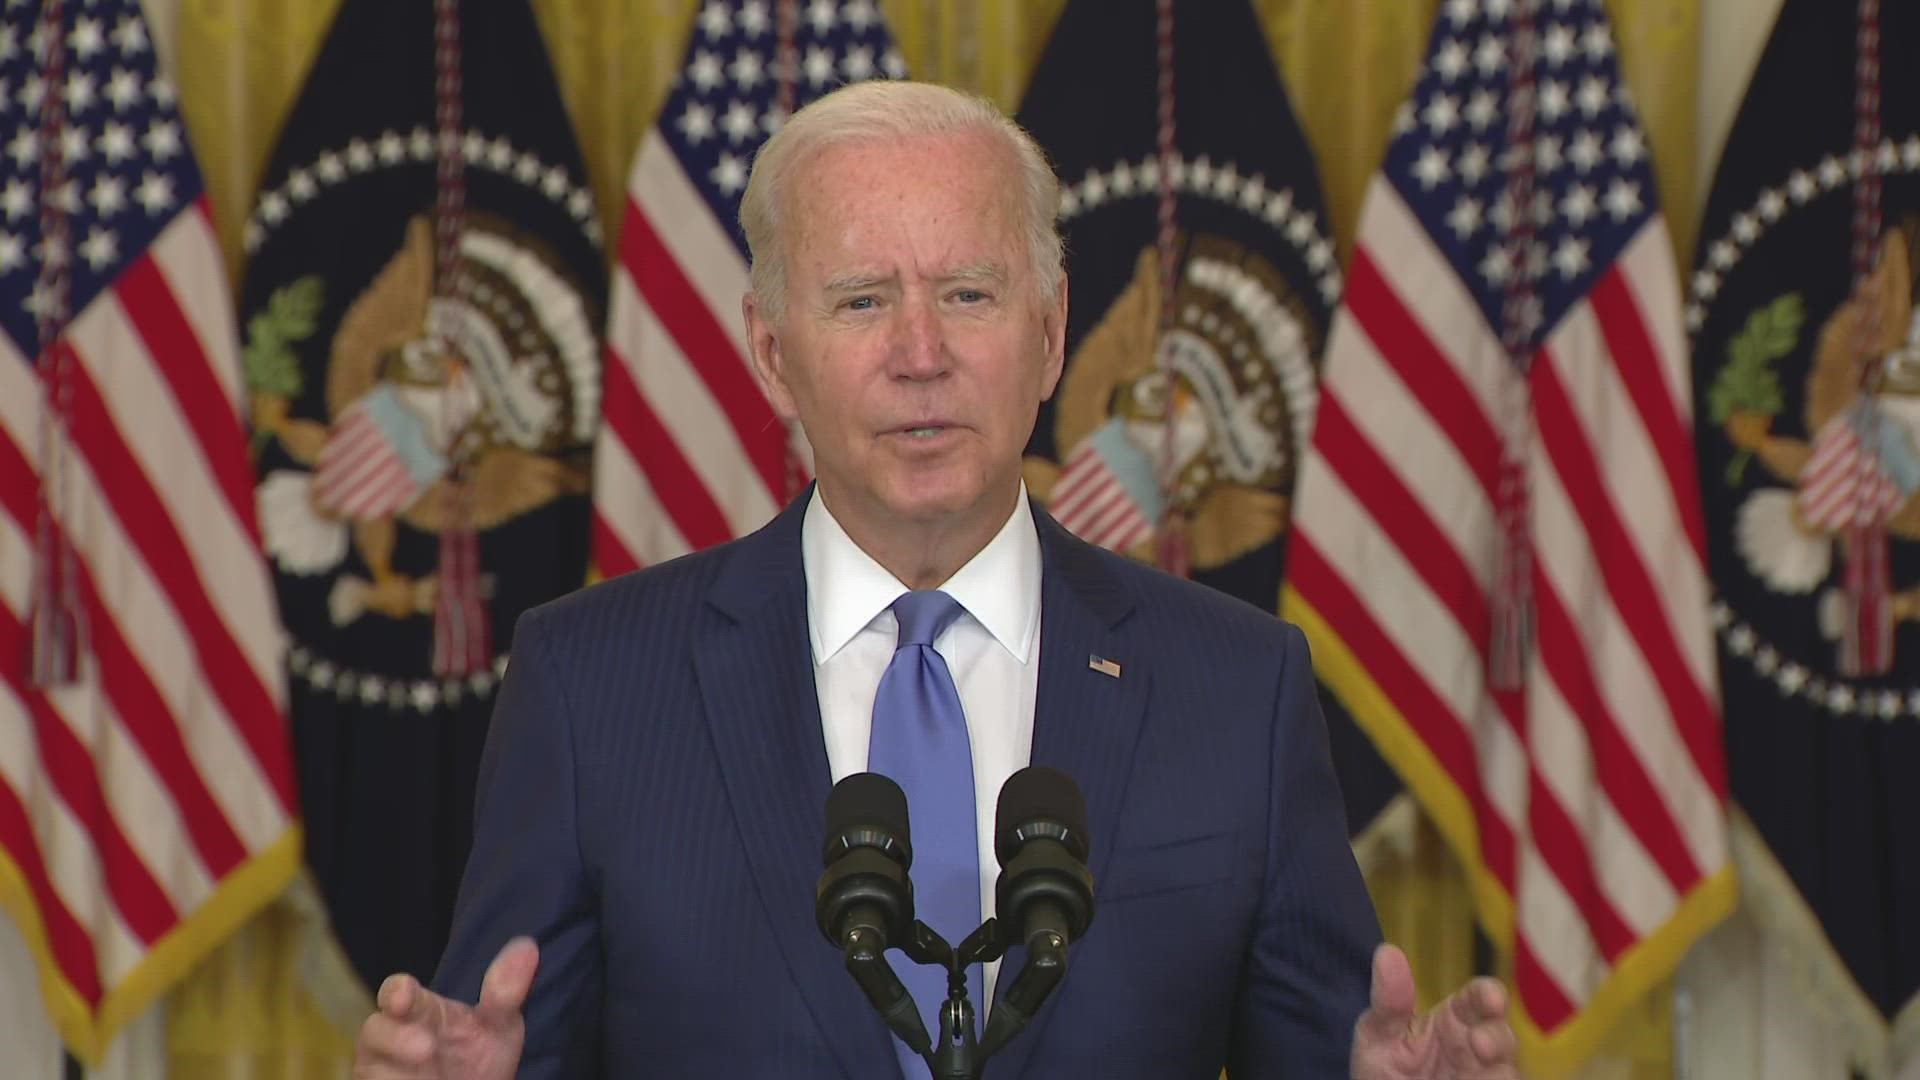 Biden criticized the governors of Texas and Florida as well as other states about their policies on vaccines and their resistance to his COVID vaccine mandate.